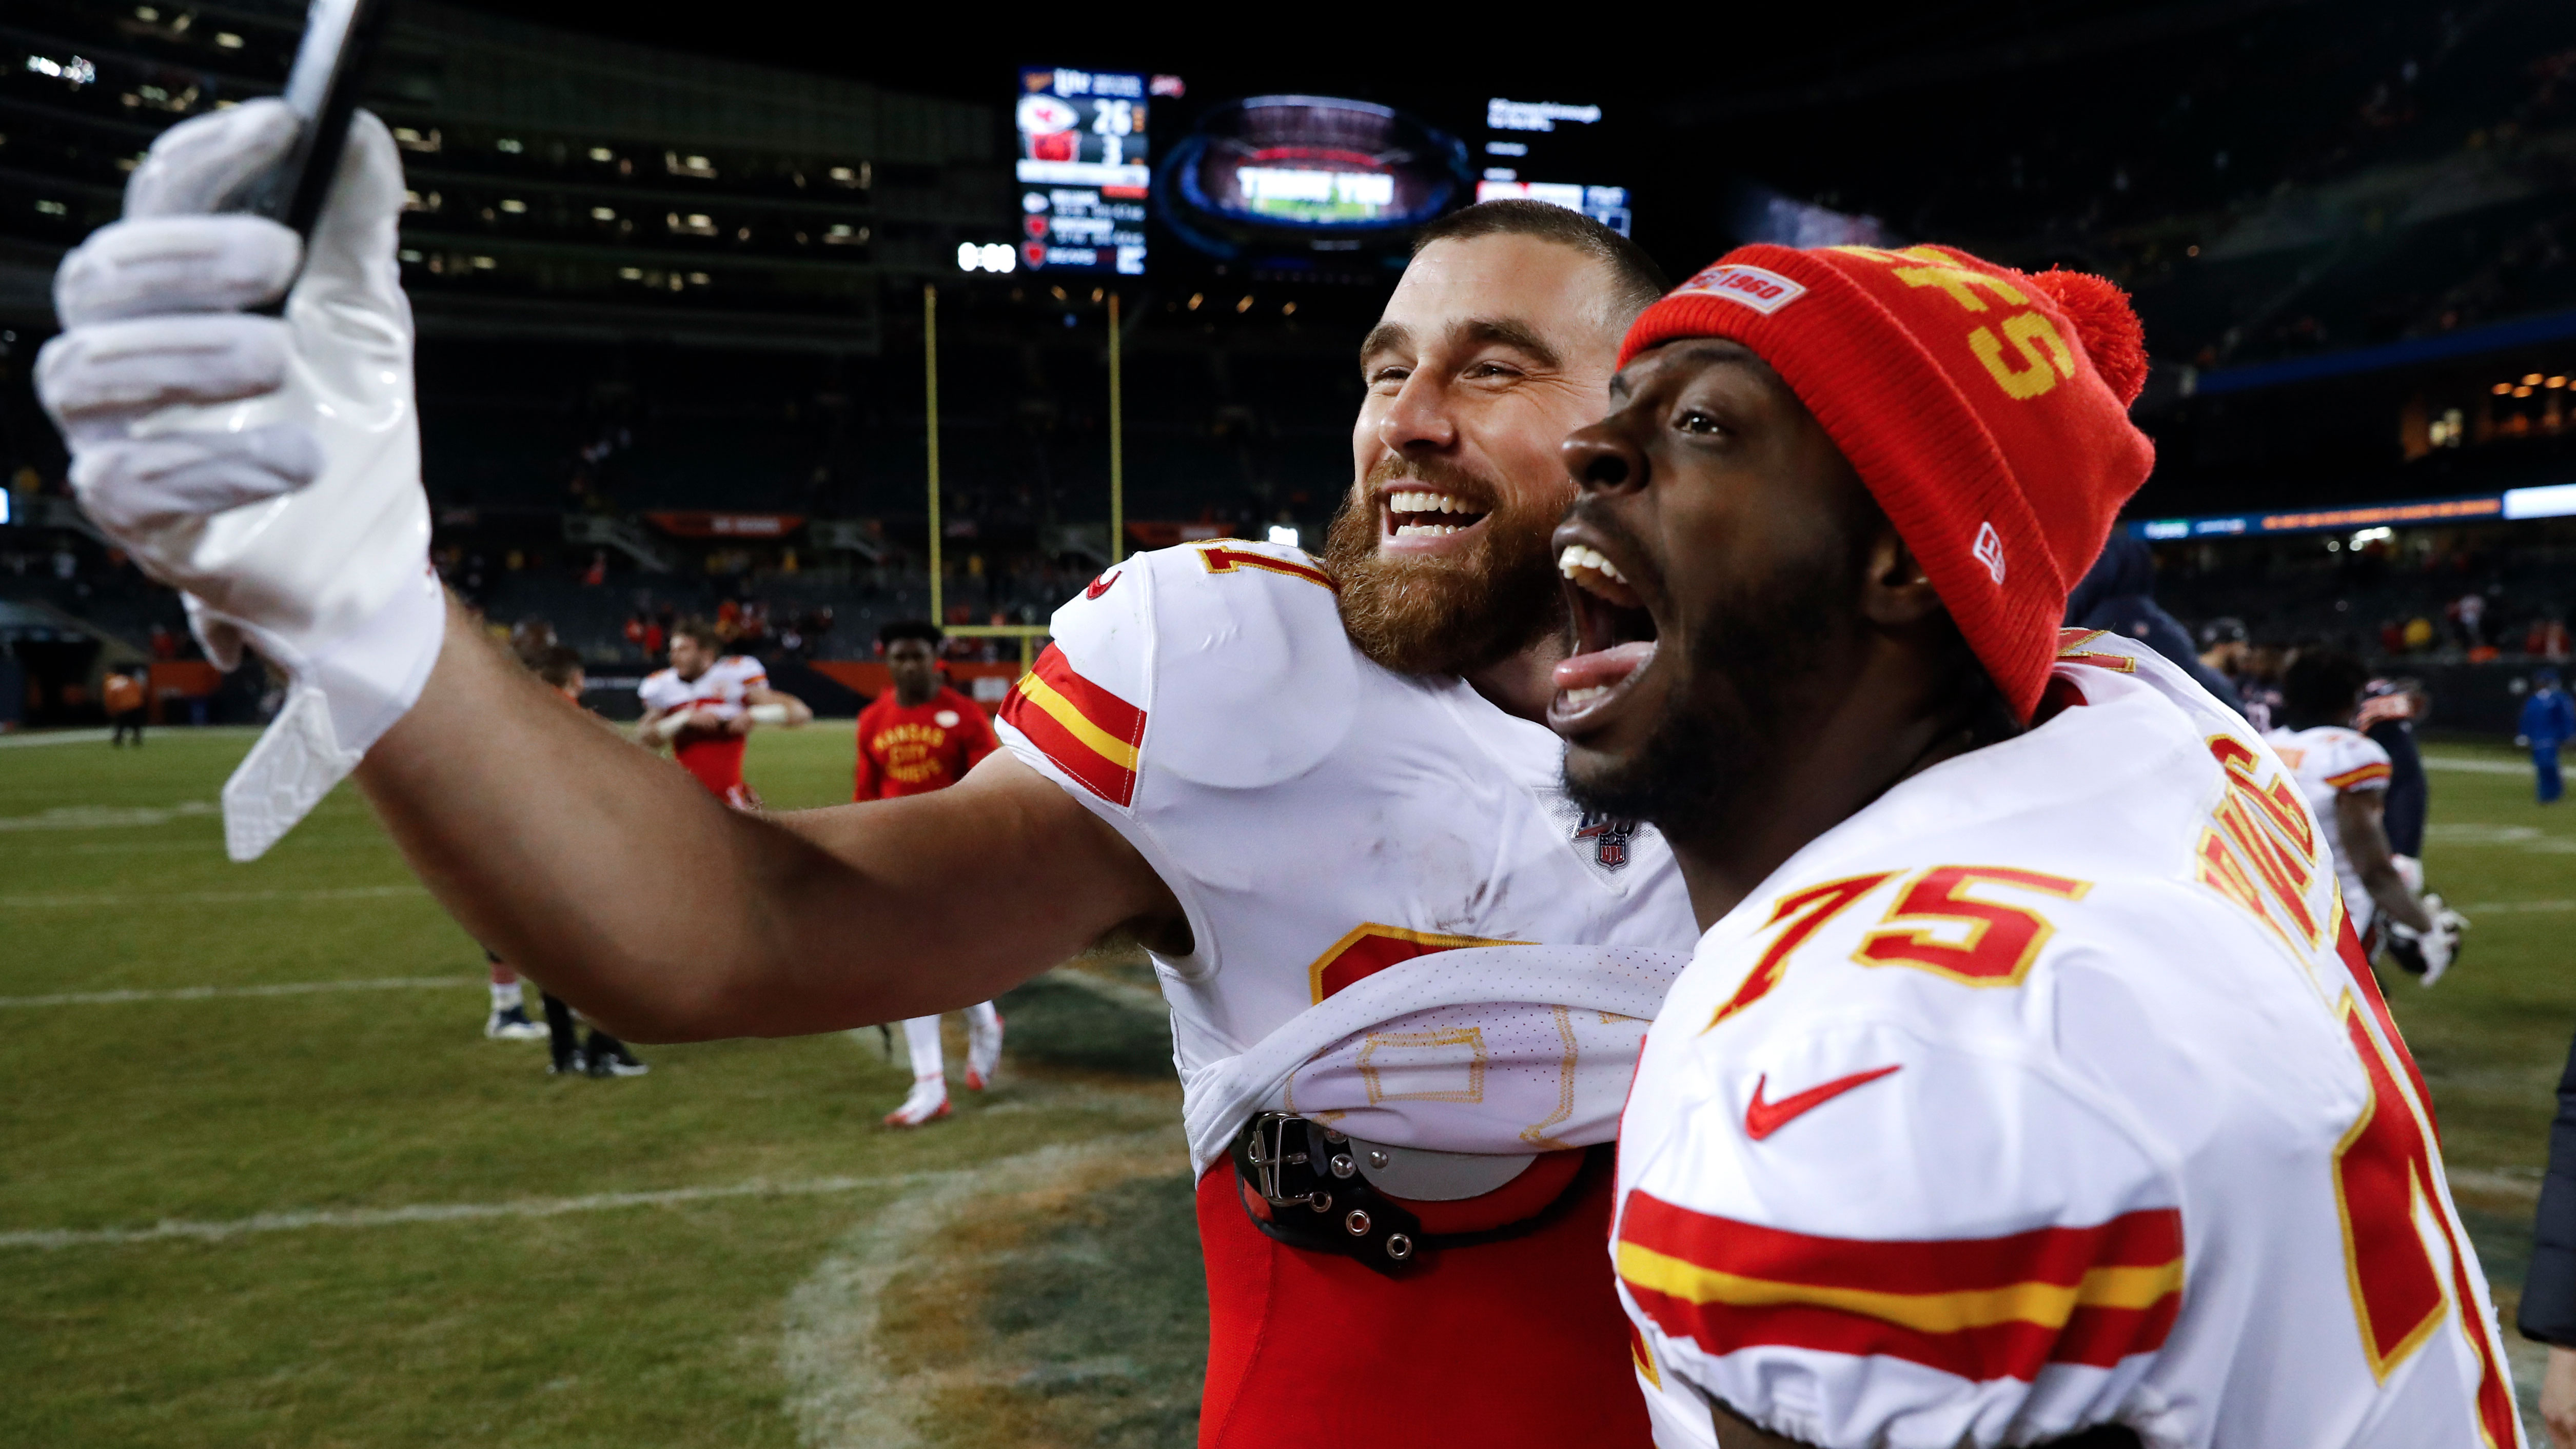 Offense, defense, special teams: Chiefs are looking good across the board